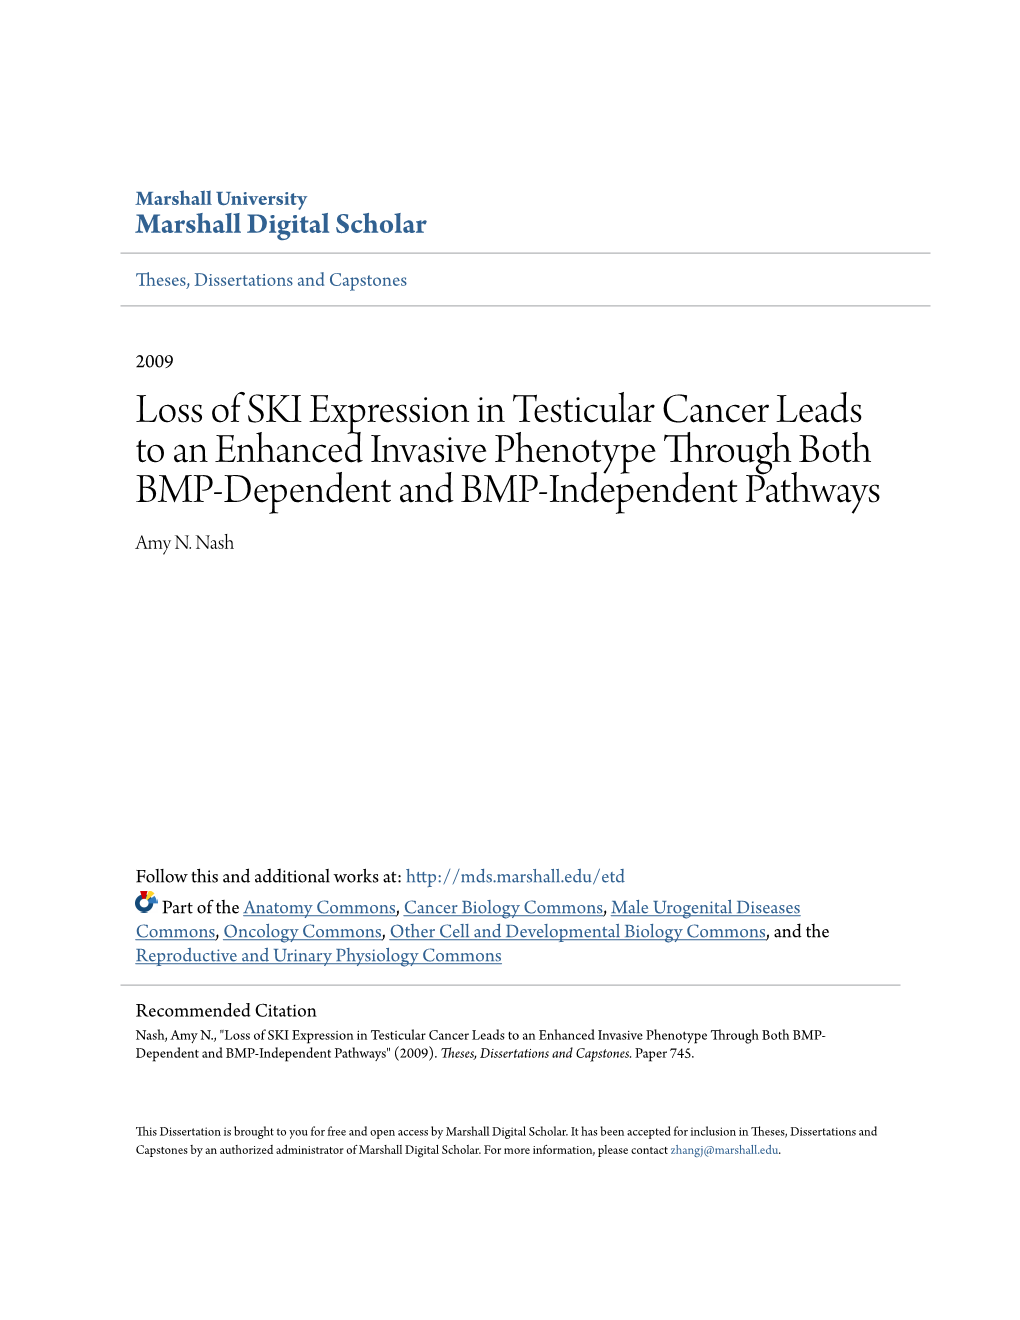 Loss of SKI Expression in Testicular Cancer Leads to an Enhanced Invasive Phenotype Through Both BMP-Dependent and BMP-Independent Pathways Amy N